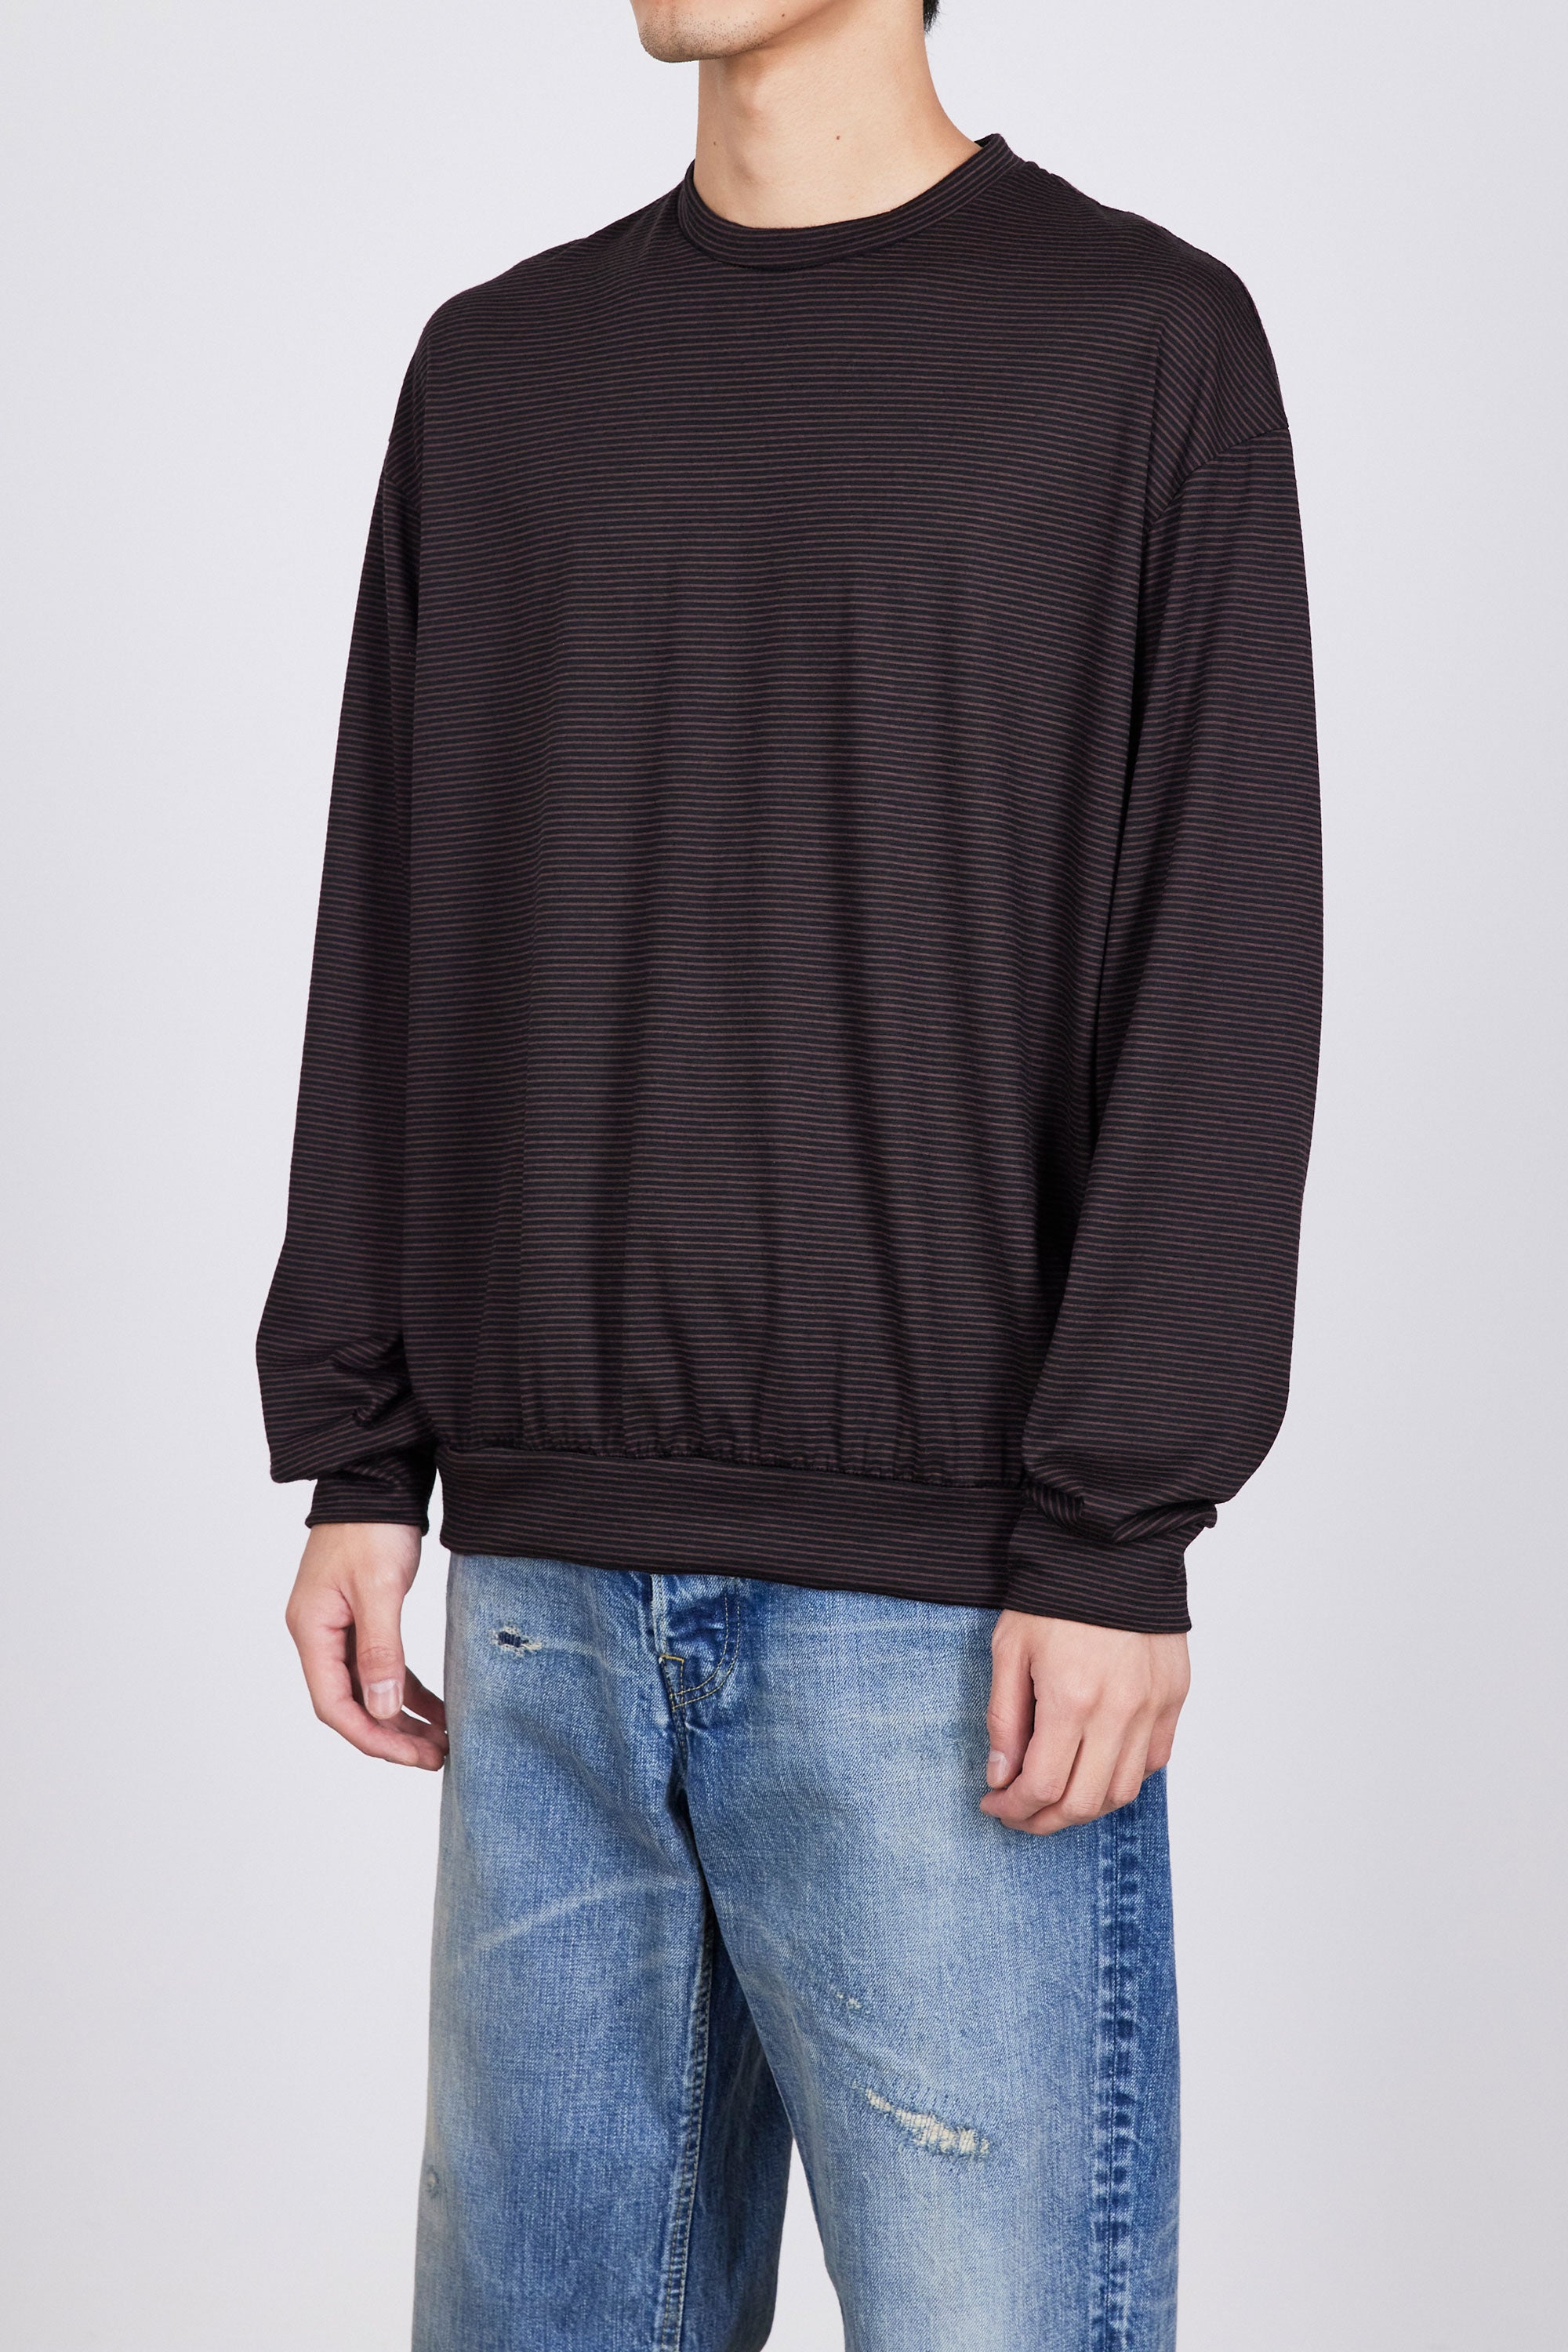 SUPER120s WOOL SINGLE JERSEY WASHABLE CREW NECK, Black × Brown